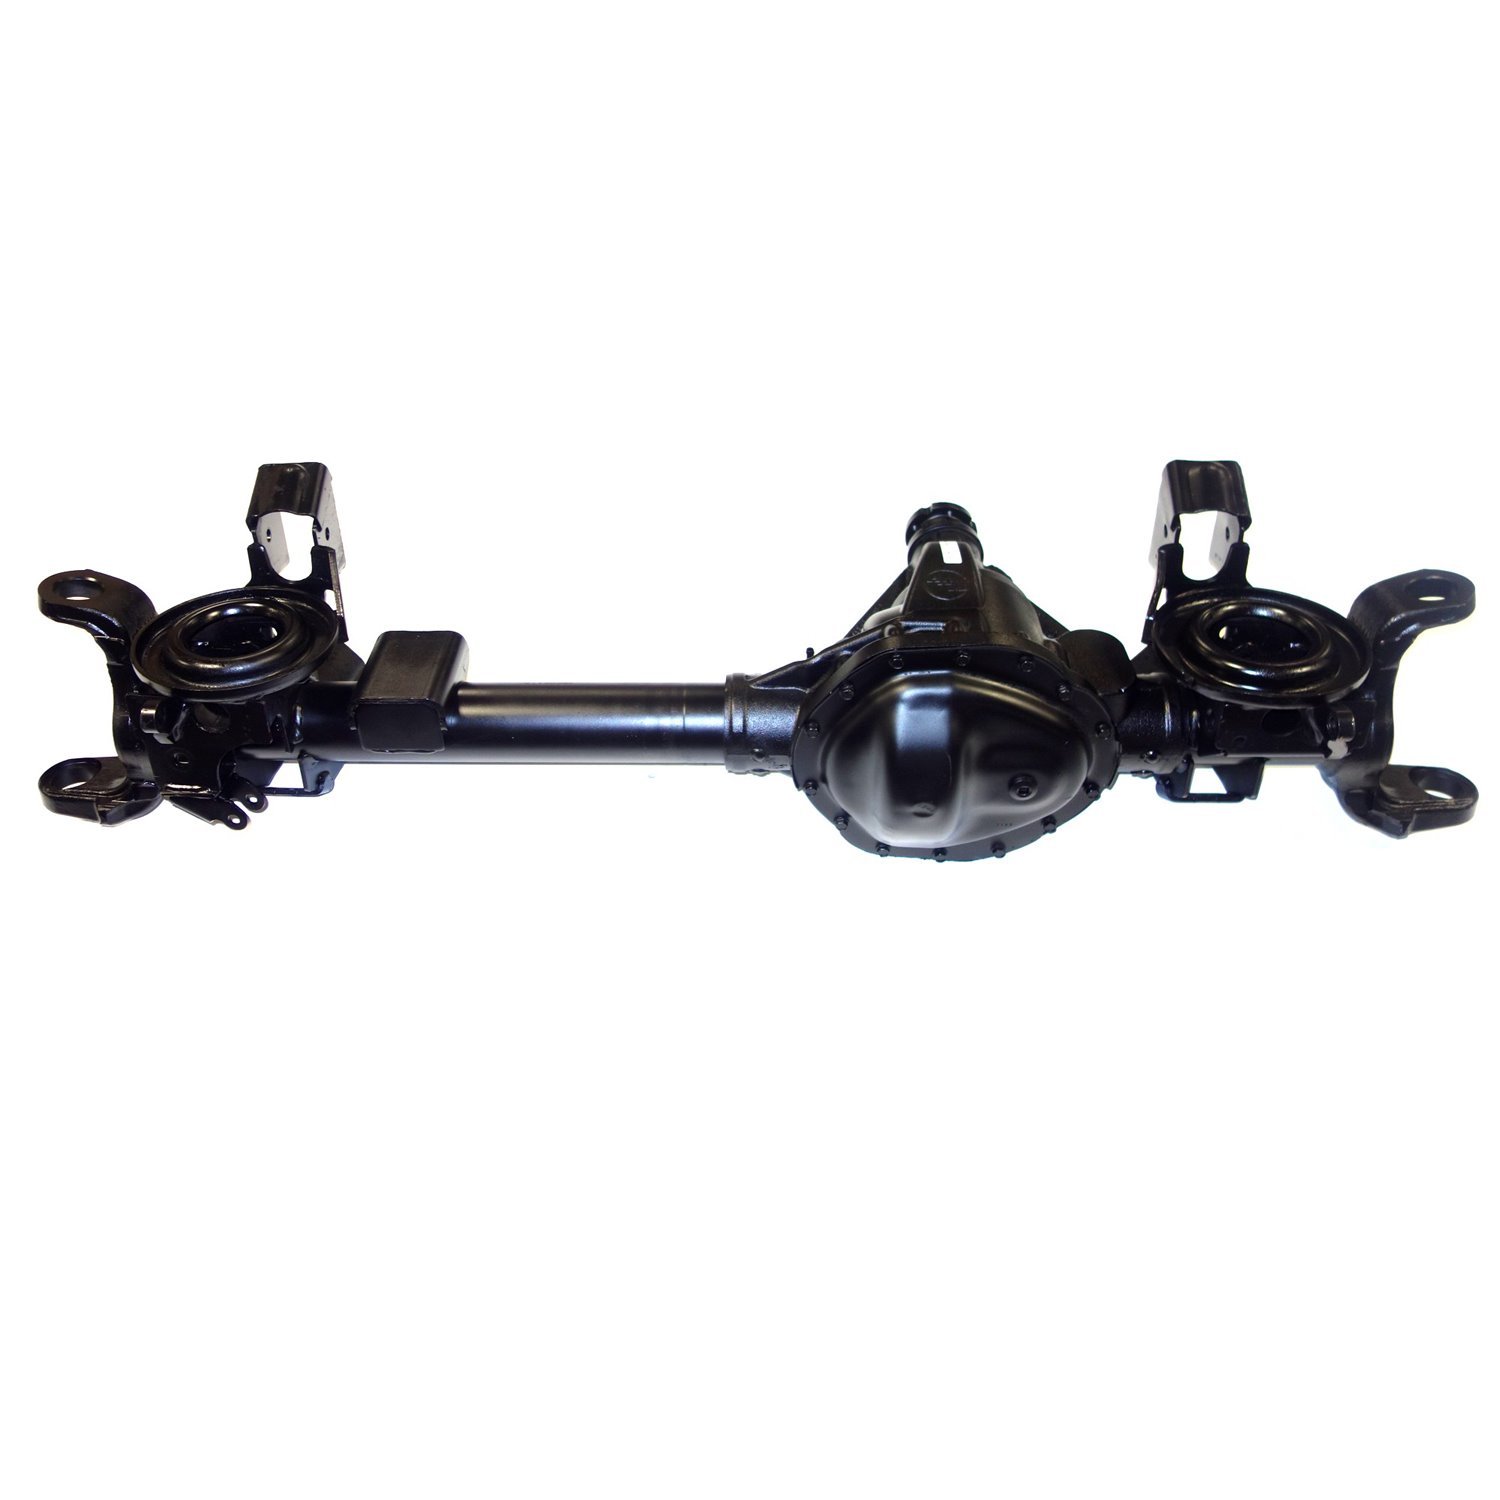 Remanufactured Chy 9.25" Axle Assy for 2006-3/18/07 Ram 1500 Mega Cab, 2500 & 3500, 4.10